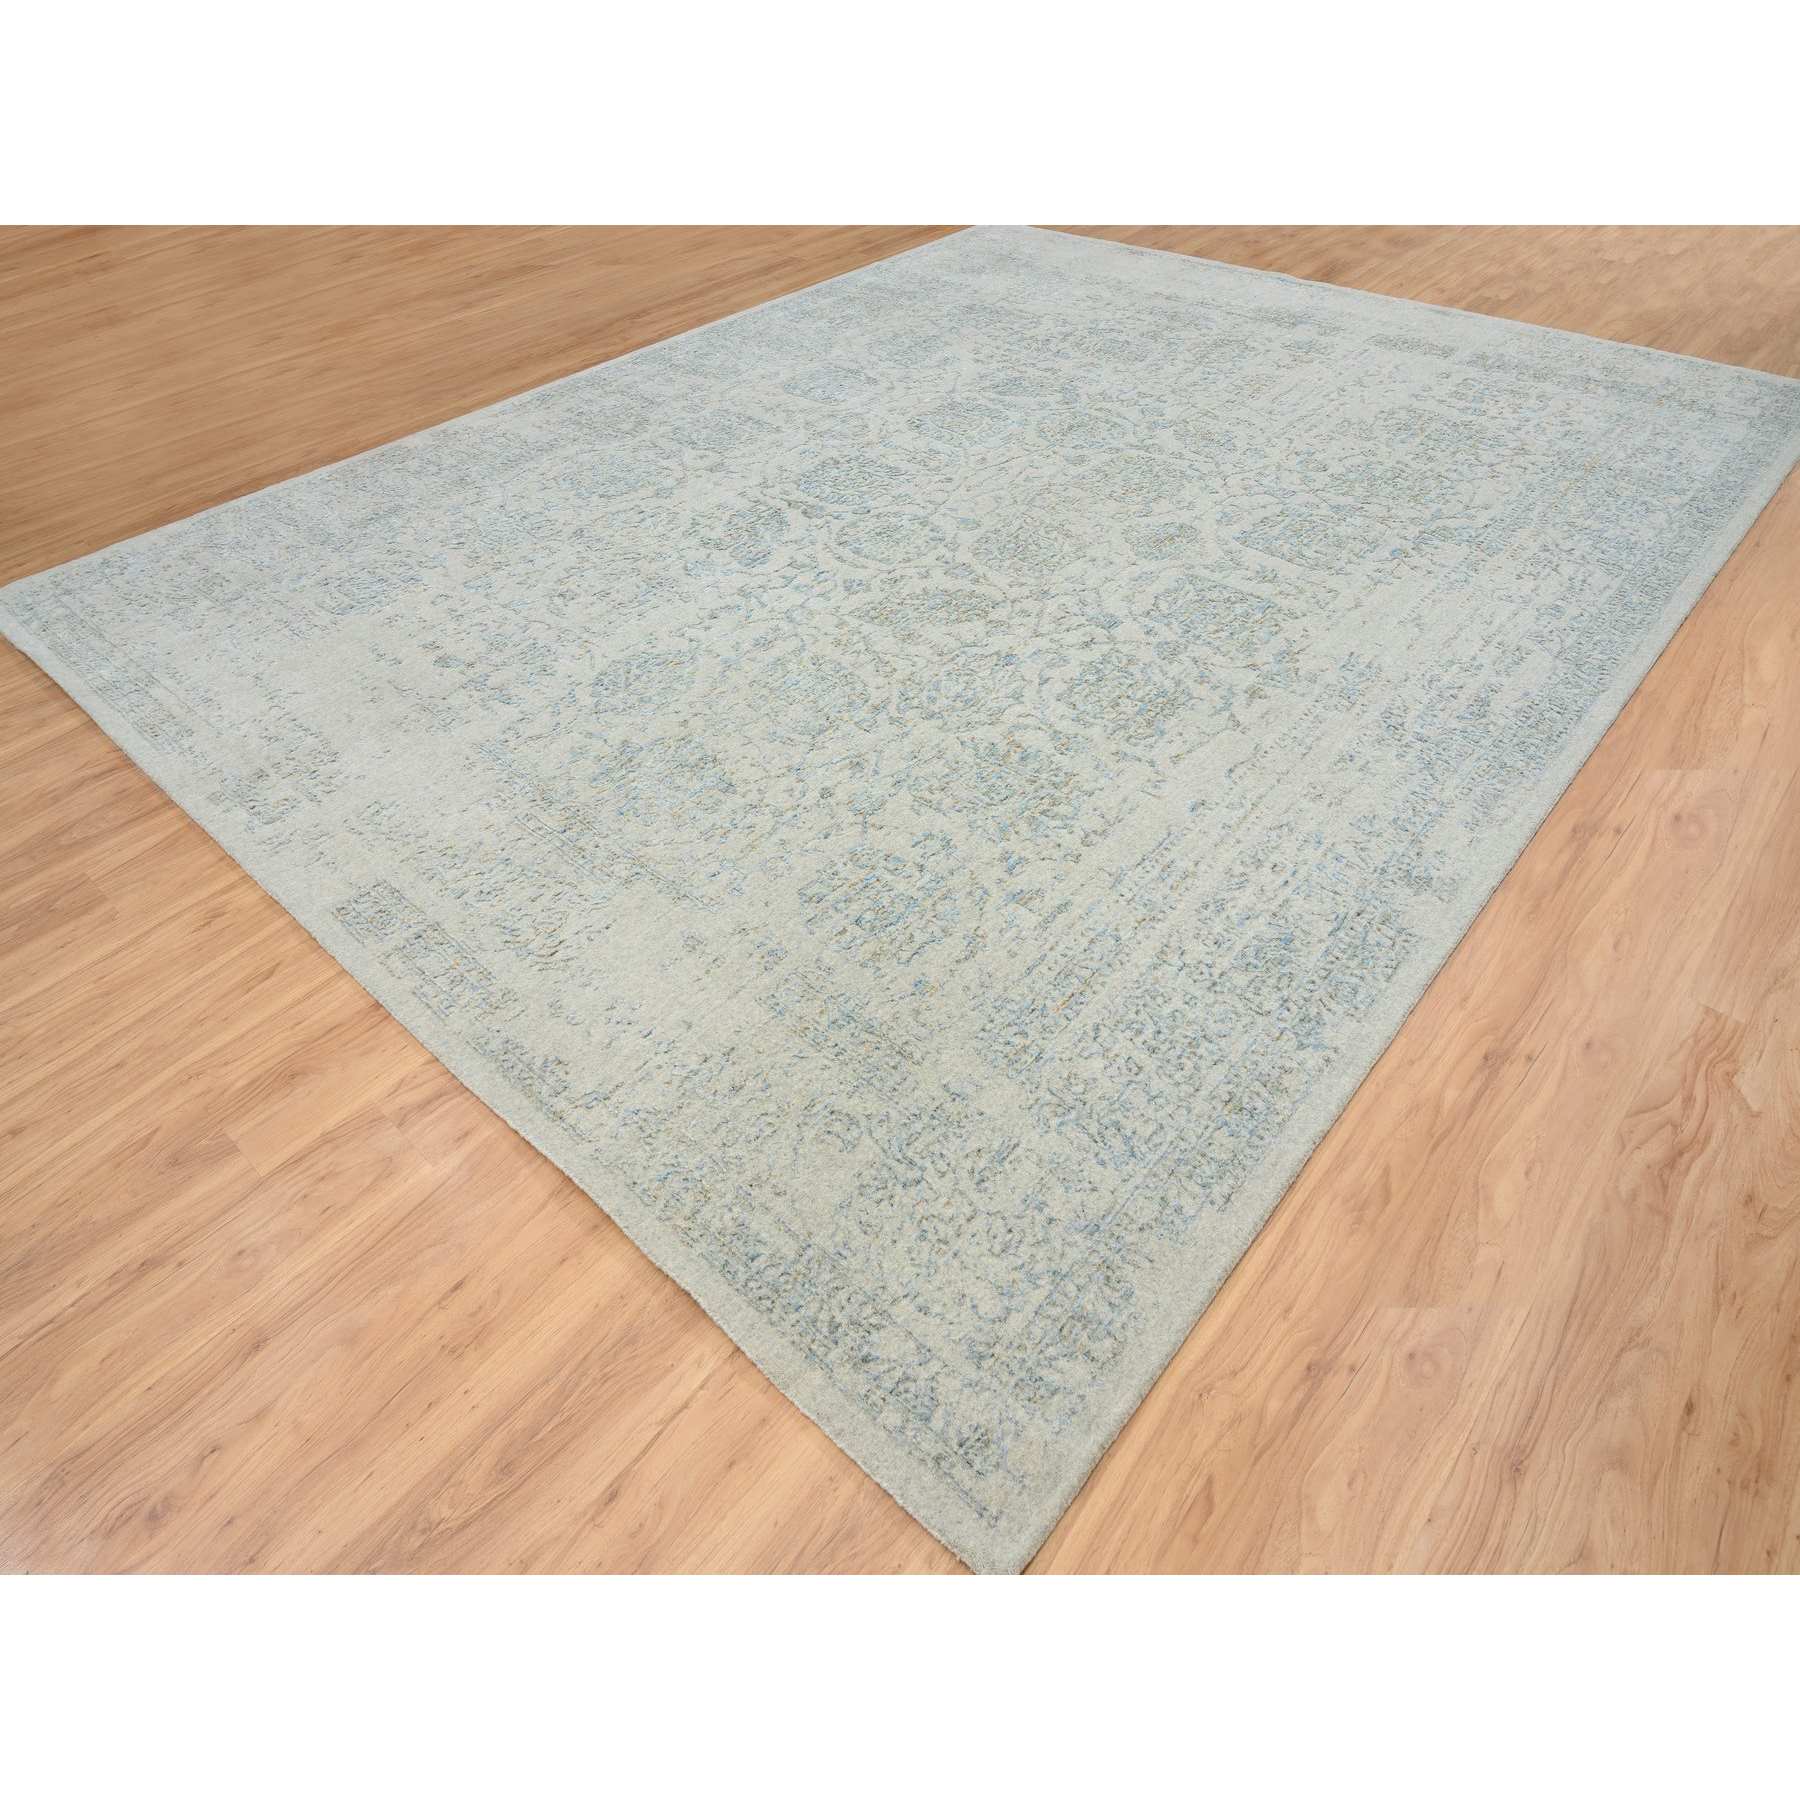 Transitional-Hand-Loomed-Rug-323020